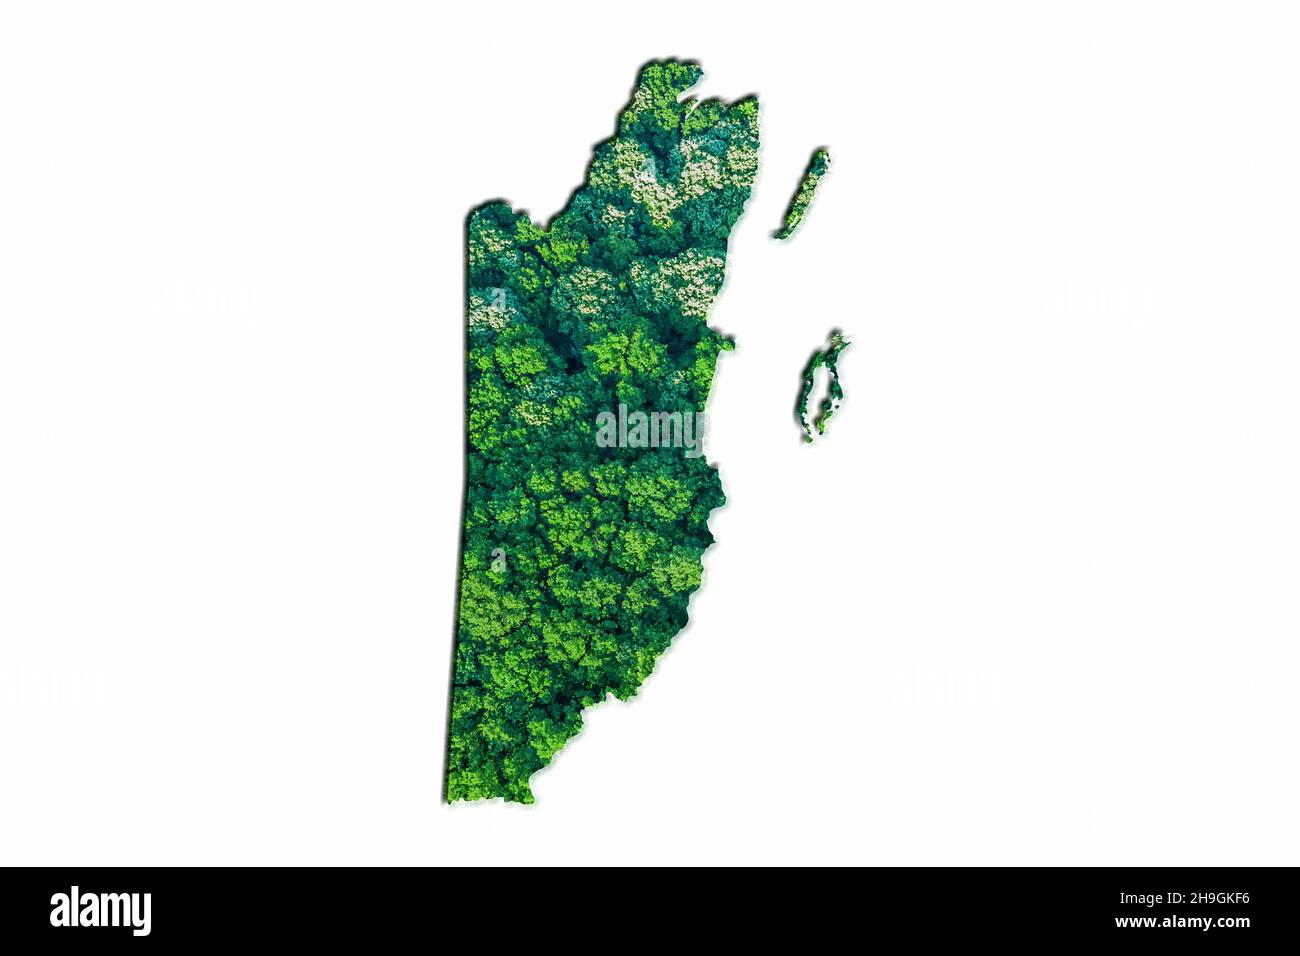 Green Forest Map of Belize, on white background Stock Photo